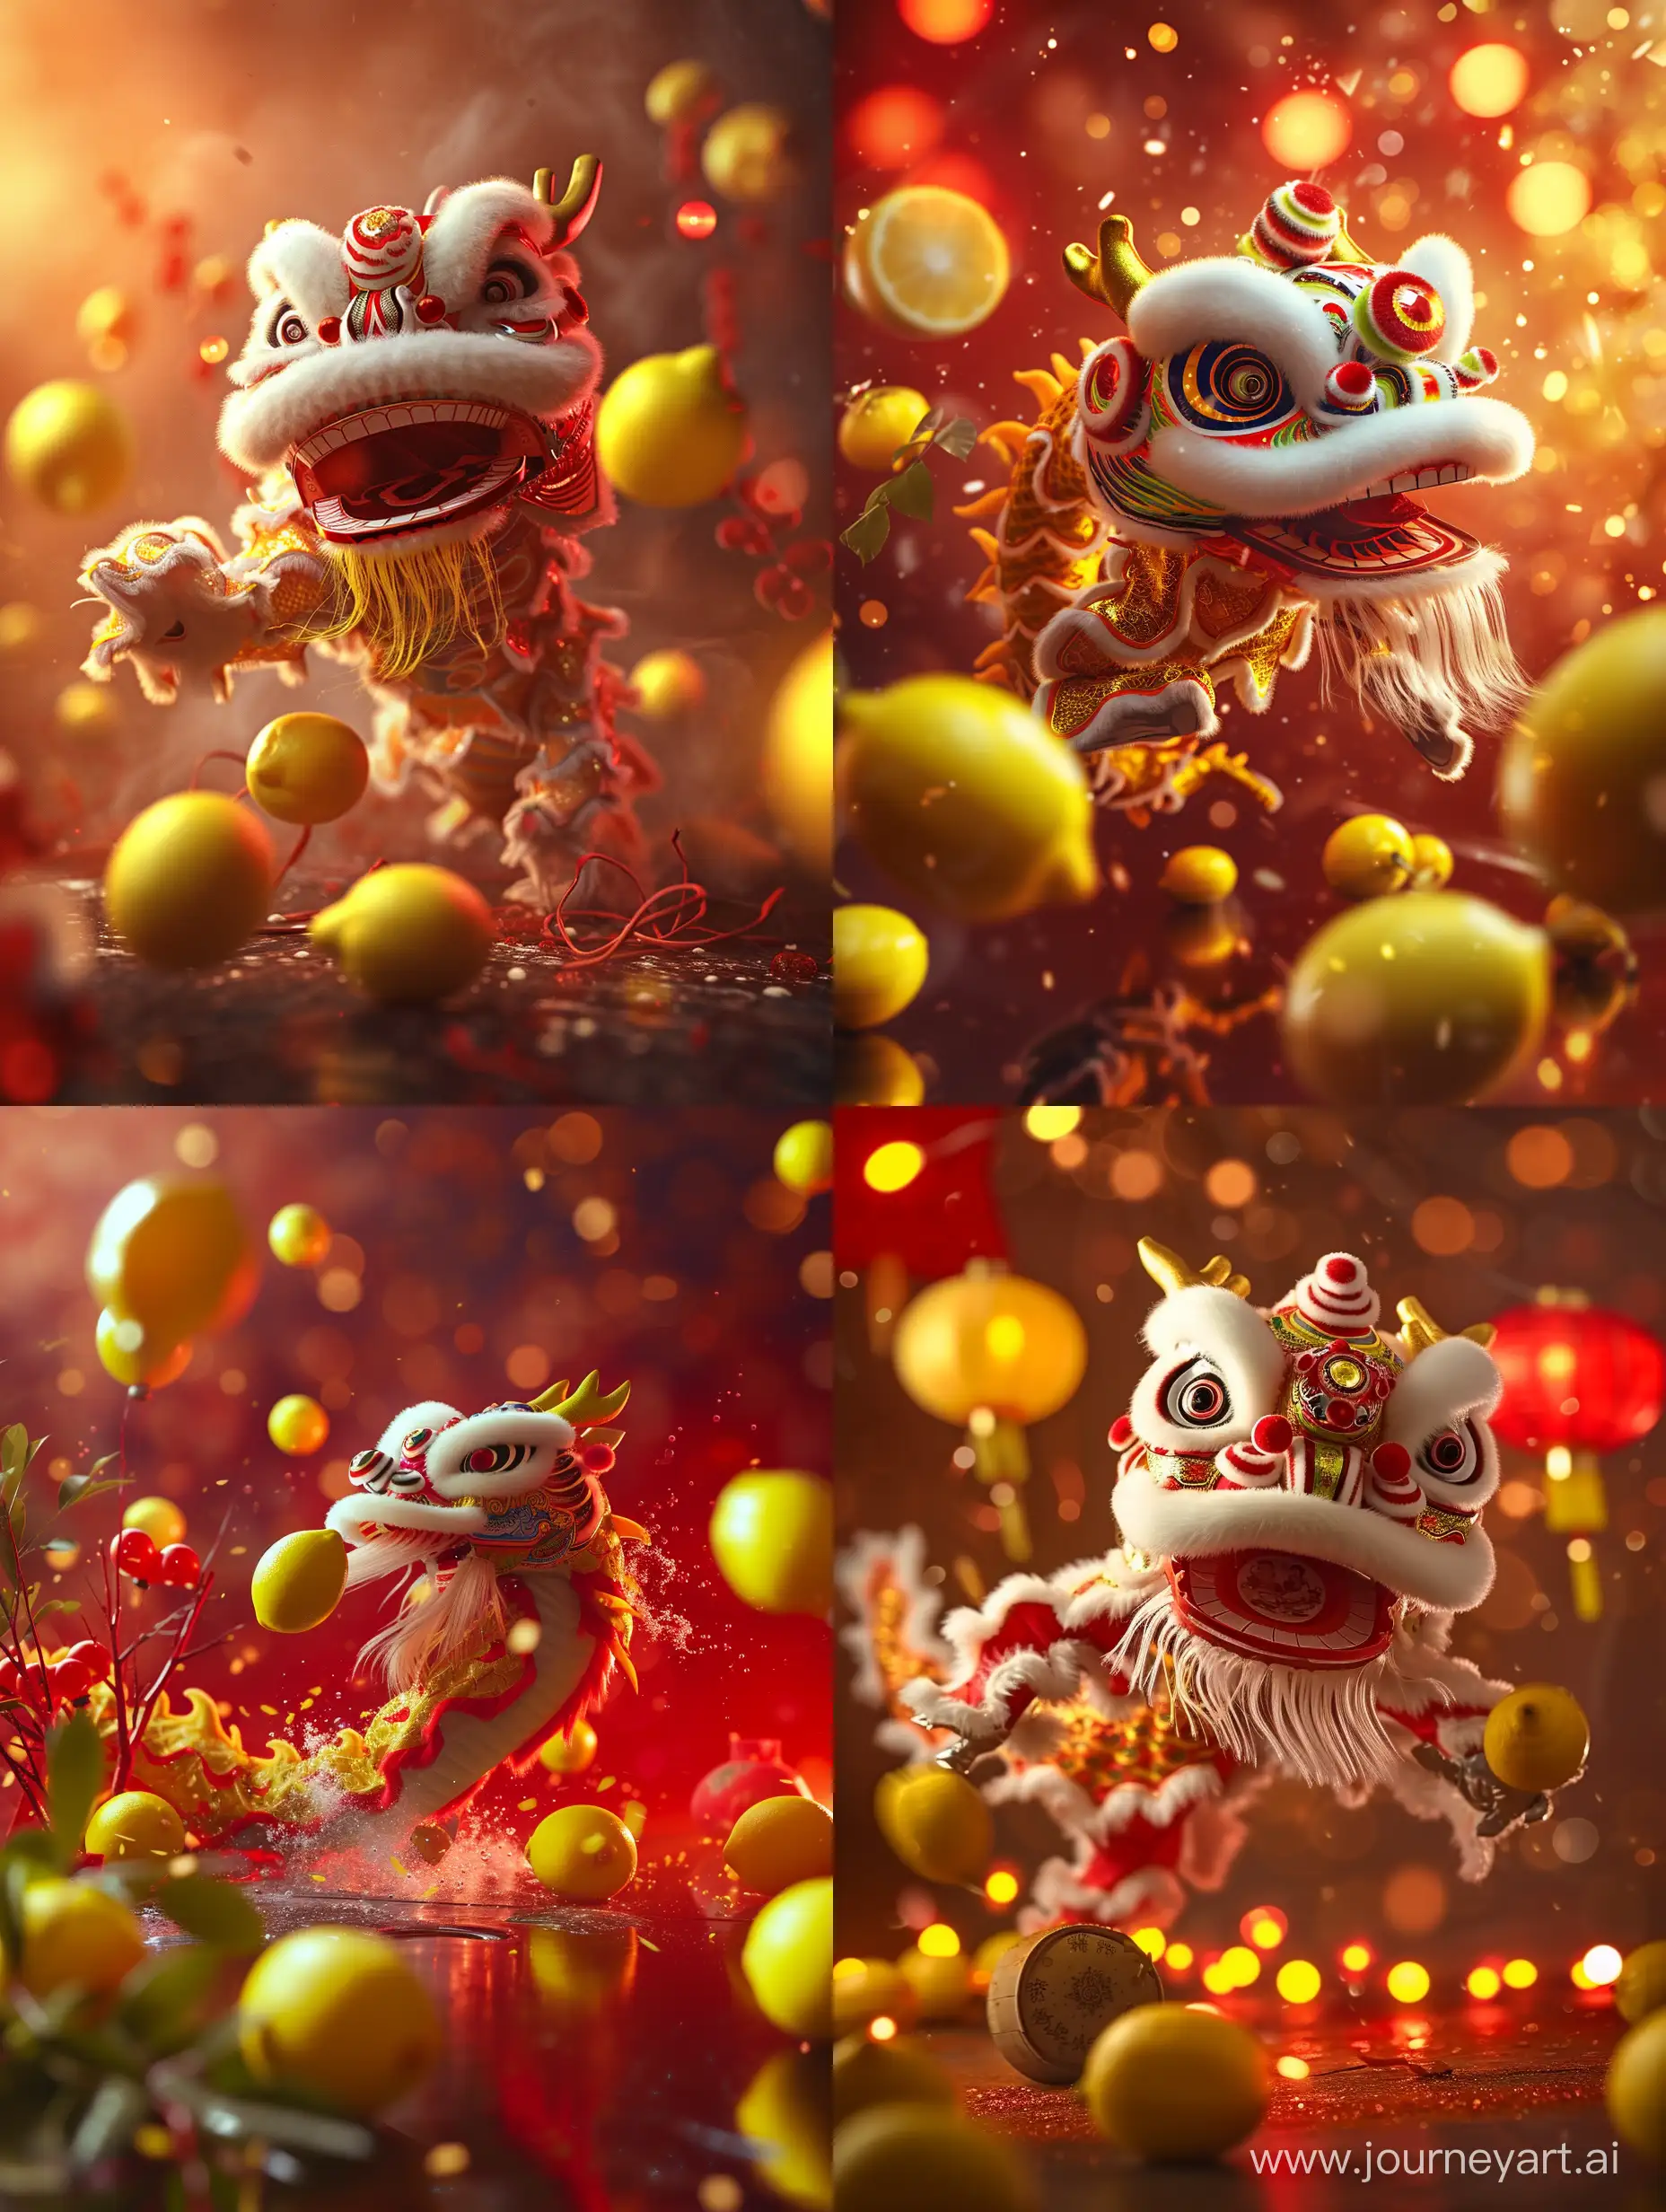 ultra realistic, chinese new year dragon dance. is jumping there are some lemons. lemon light red and yellow lights. canon eos-id x mark iii dslr --v 6.0